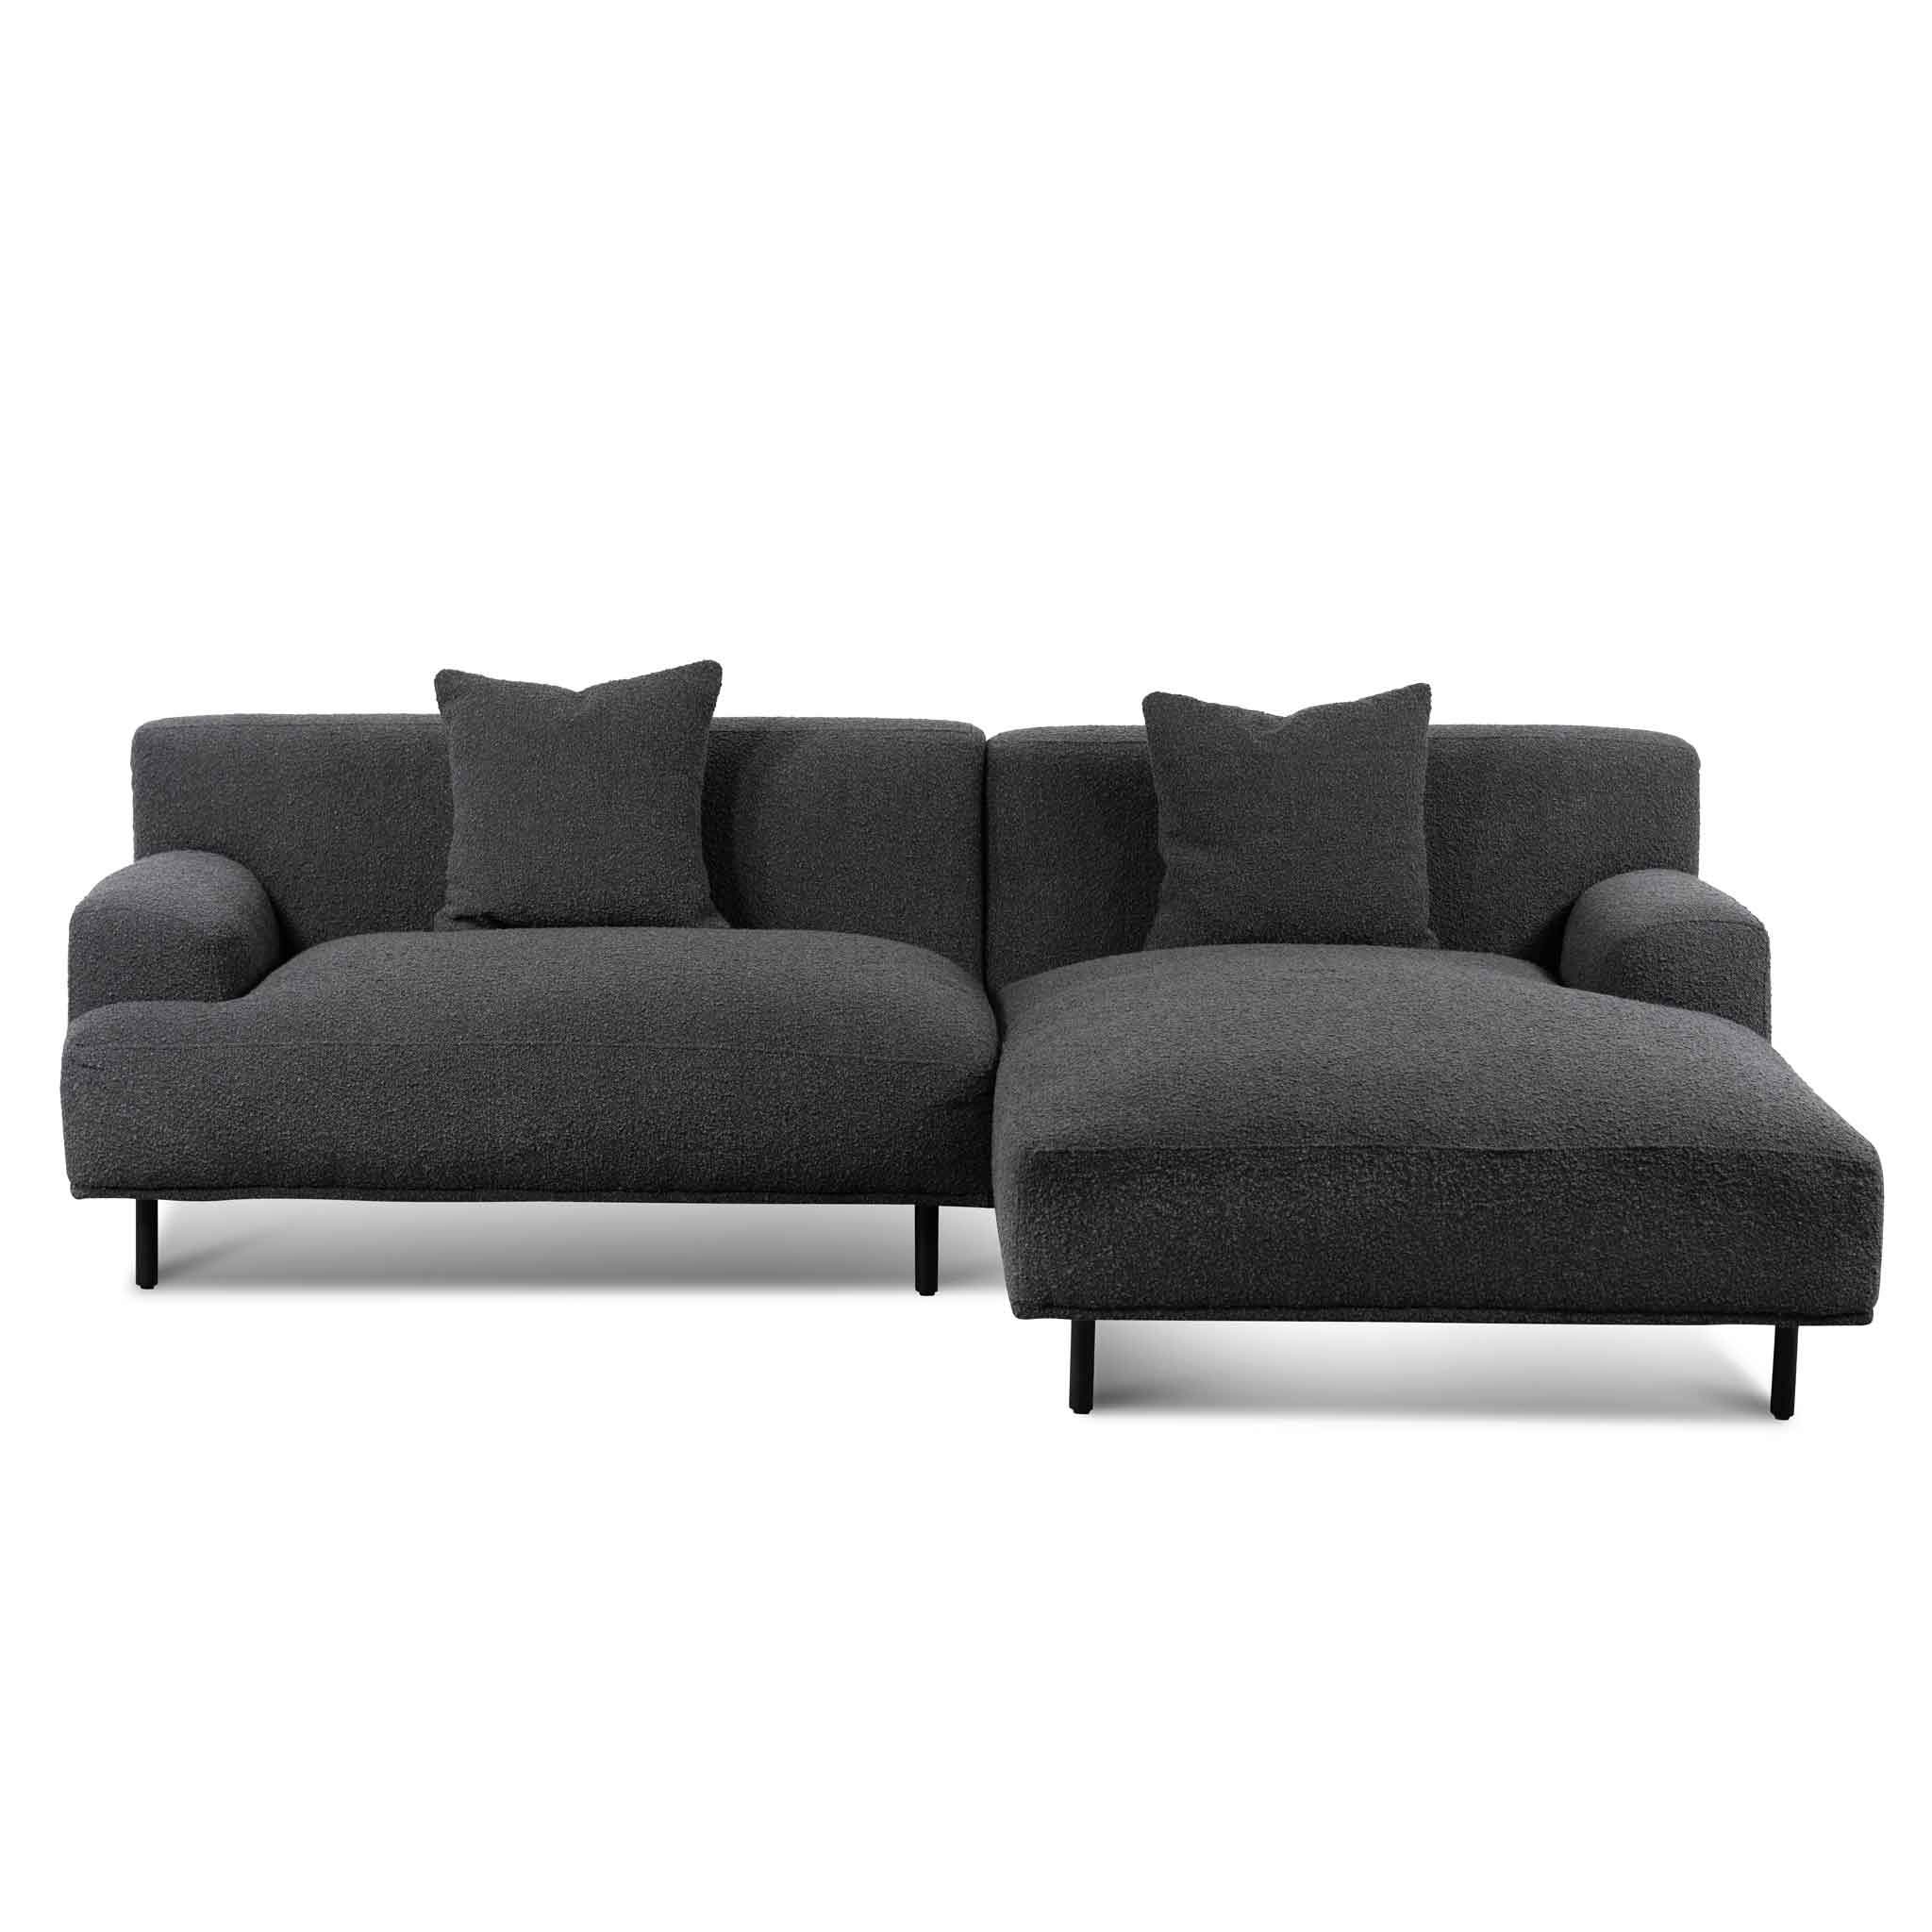 Julia Right Chaise Sofa - Charcoal Boucle - Sofas